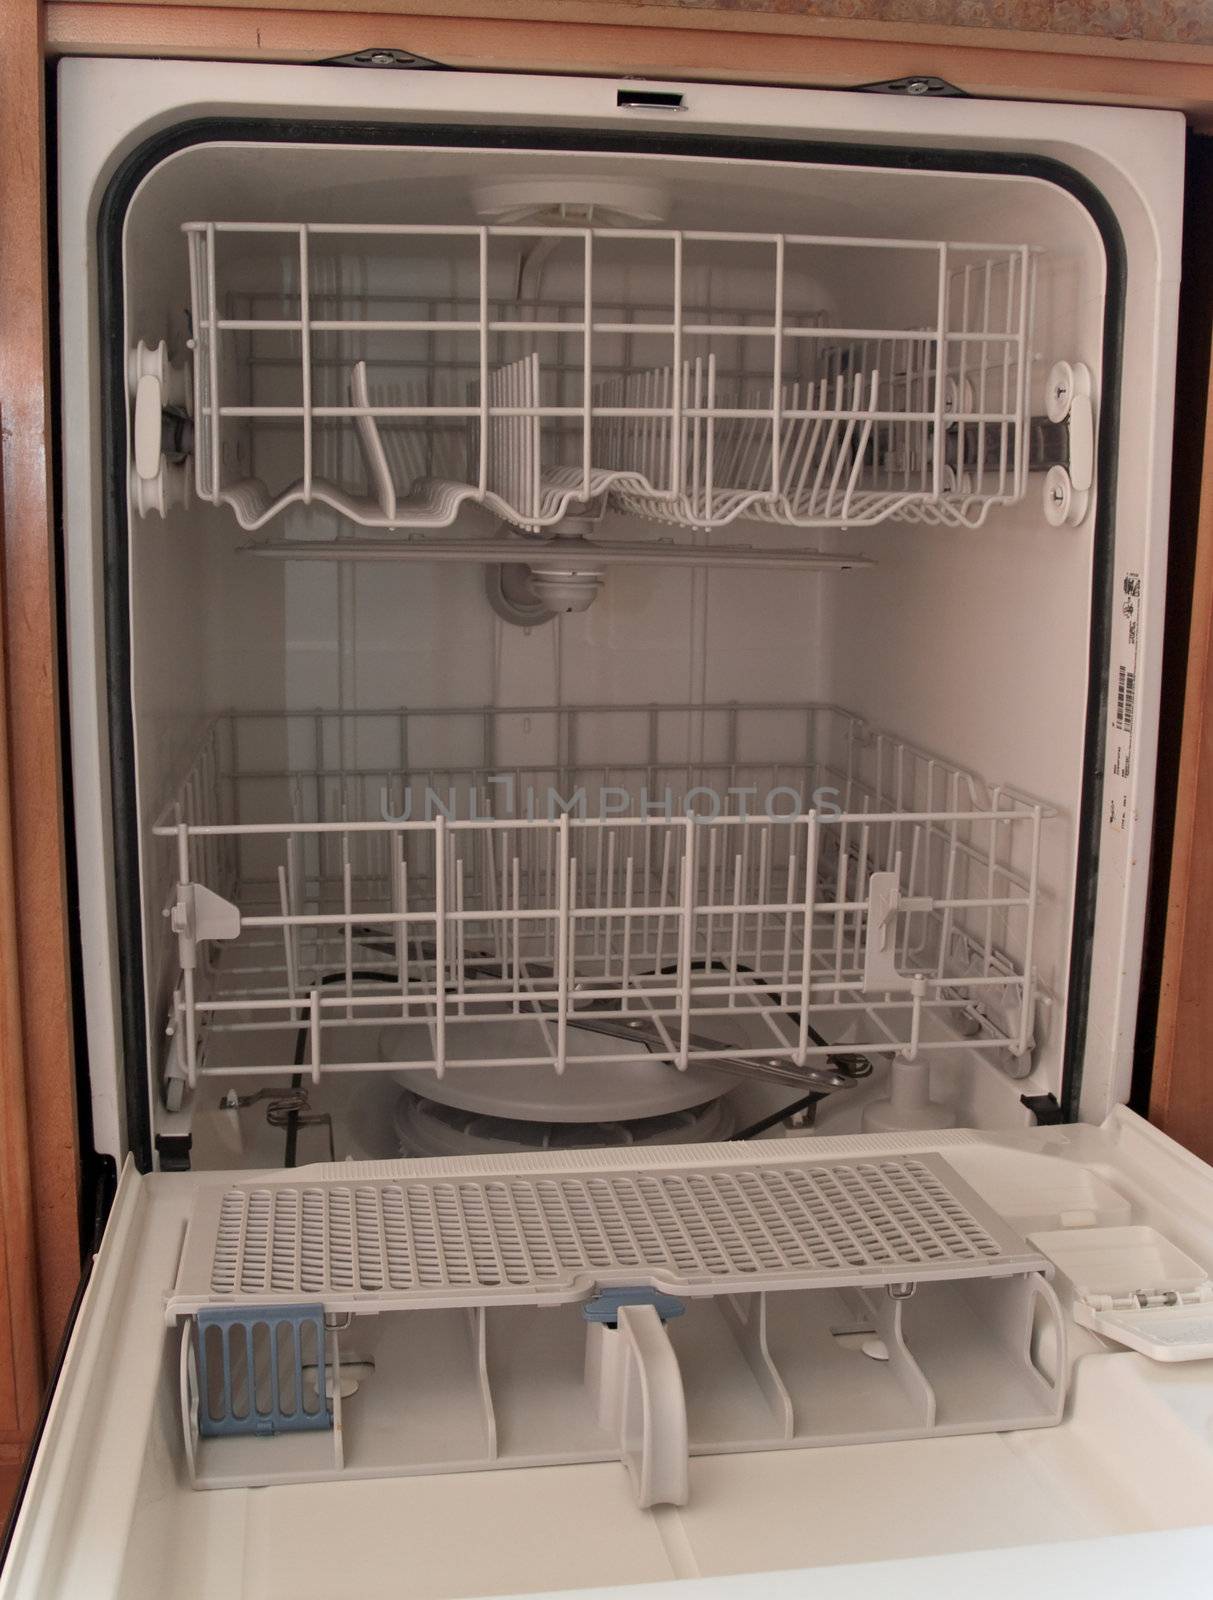 Empty, dishwasher, waser, dishes, cleaner, white, nothing, clean, new, modern, built in, appliance, kitchen